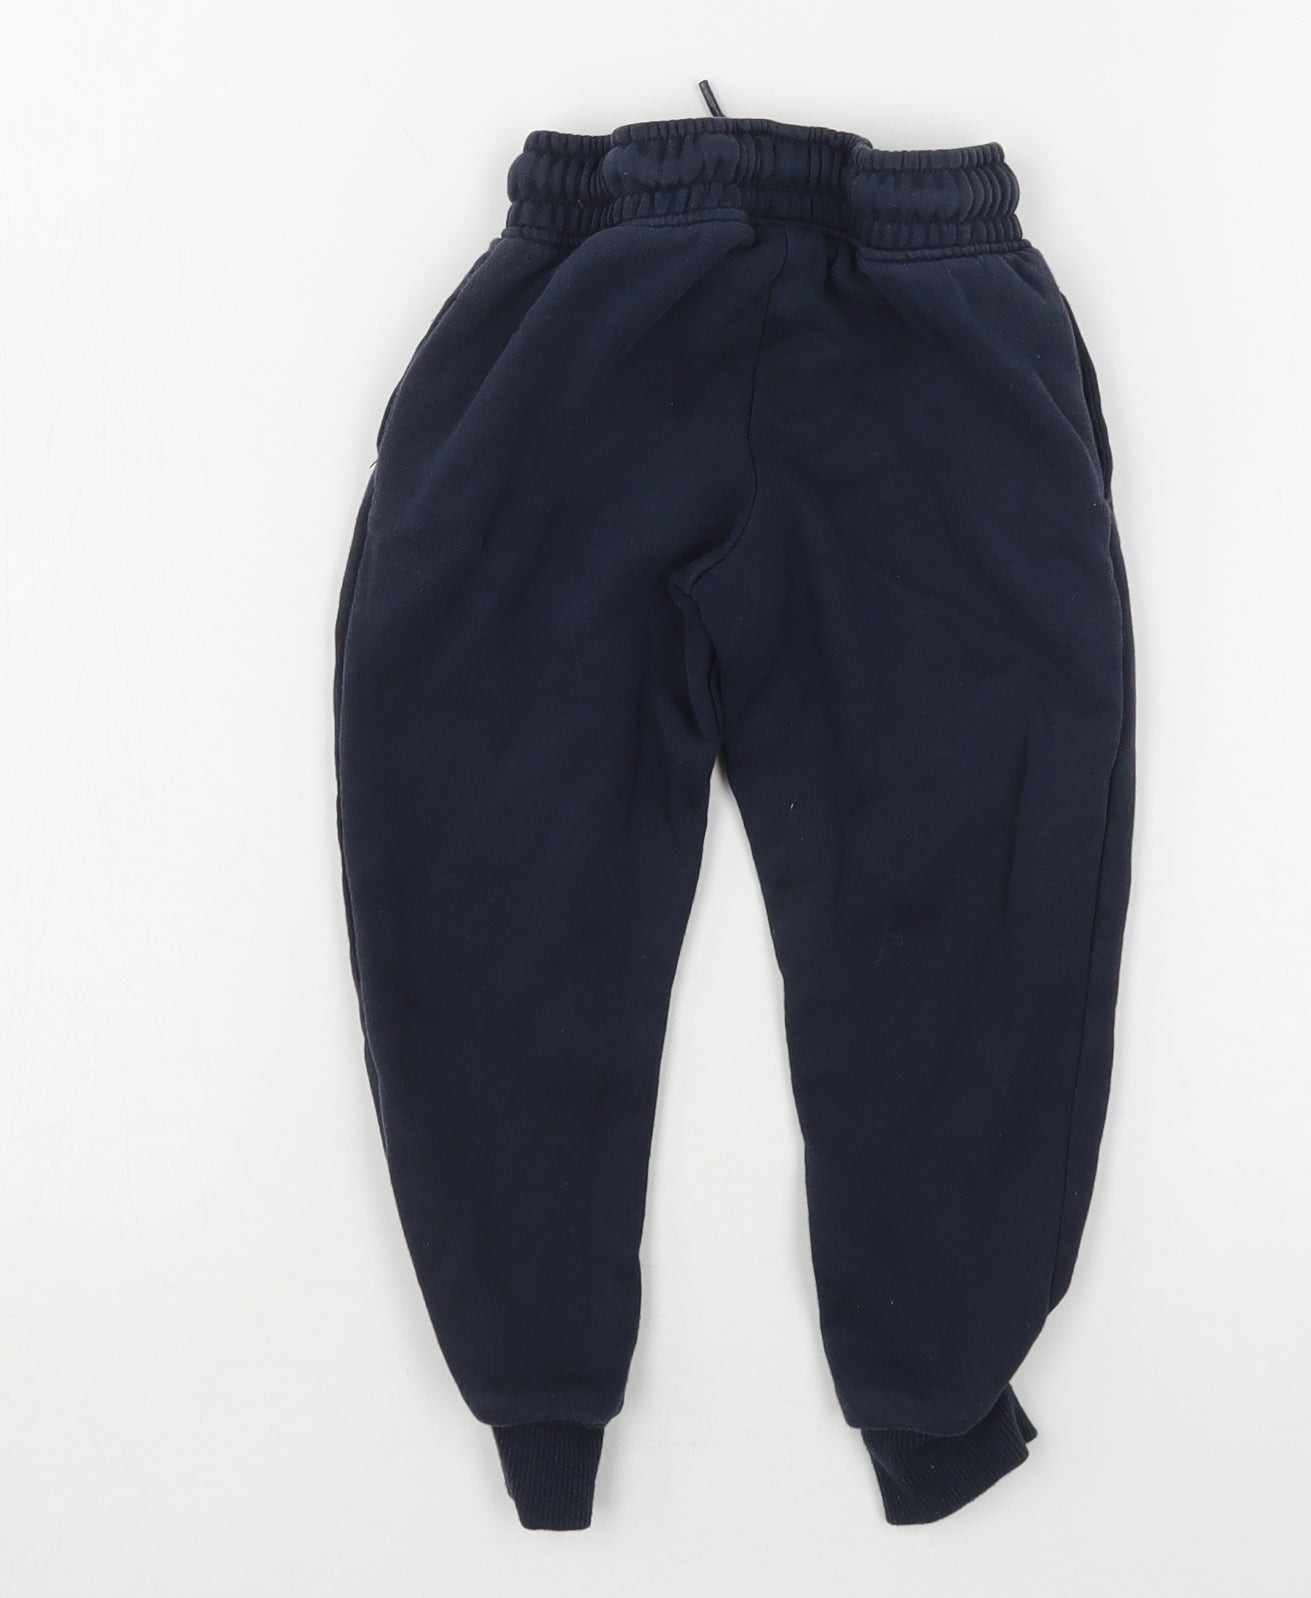 Dunnes Stores Boys Blue  Cotton Sweatpants Trousers Size 4 Years  Regular Drawstring